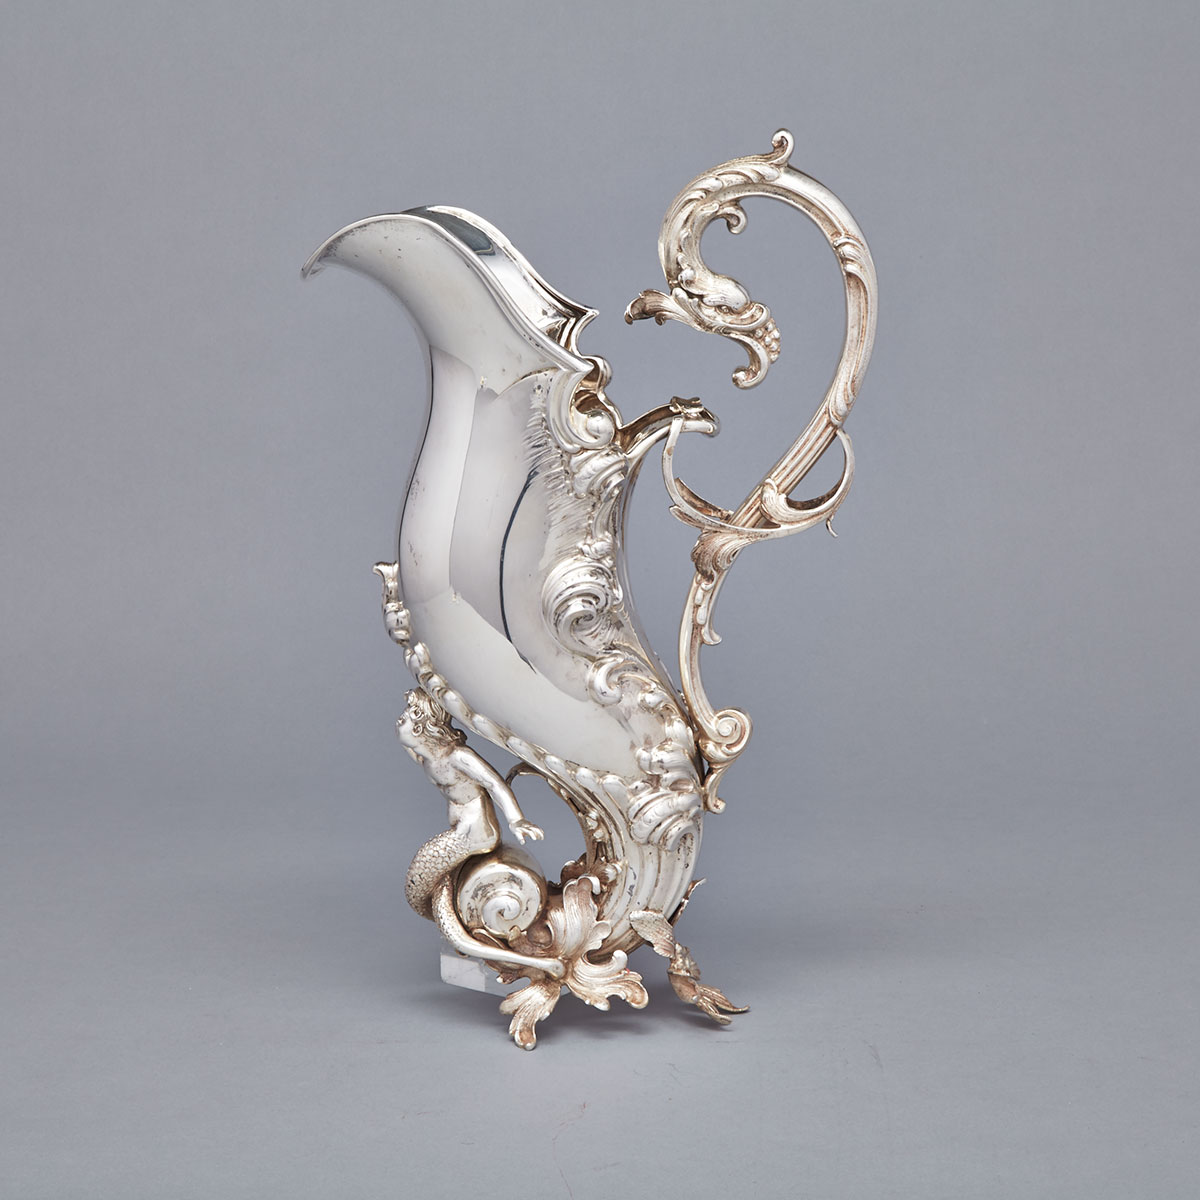 Italian Silver Ewer and Stand, for Henry Birks, c.1960